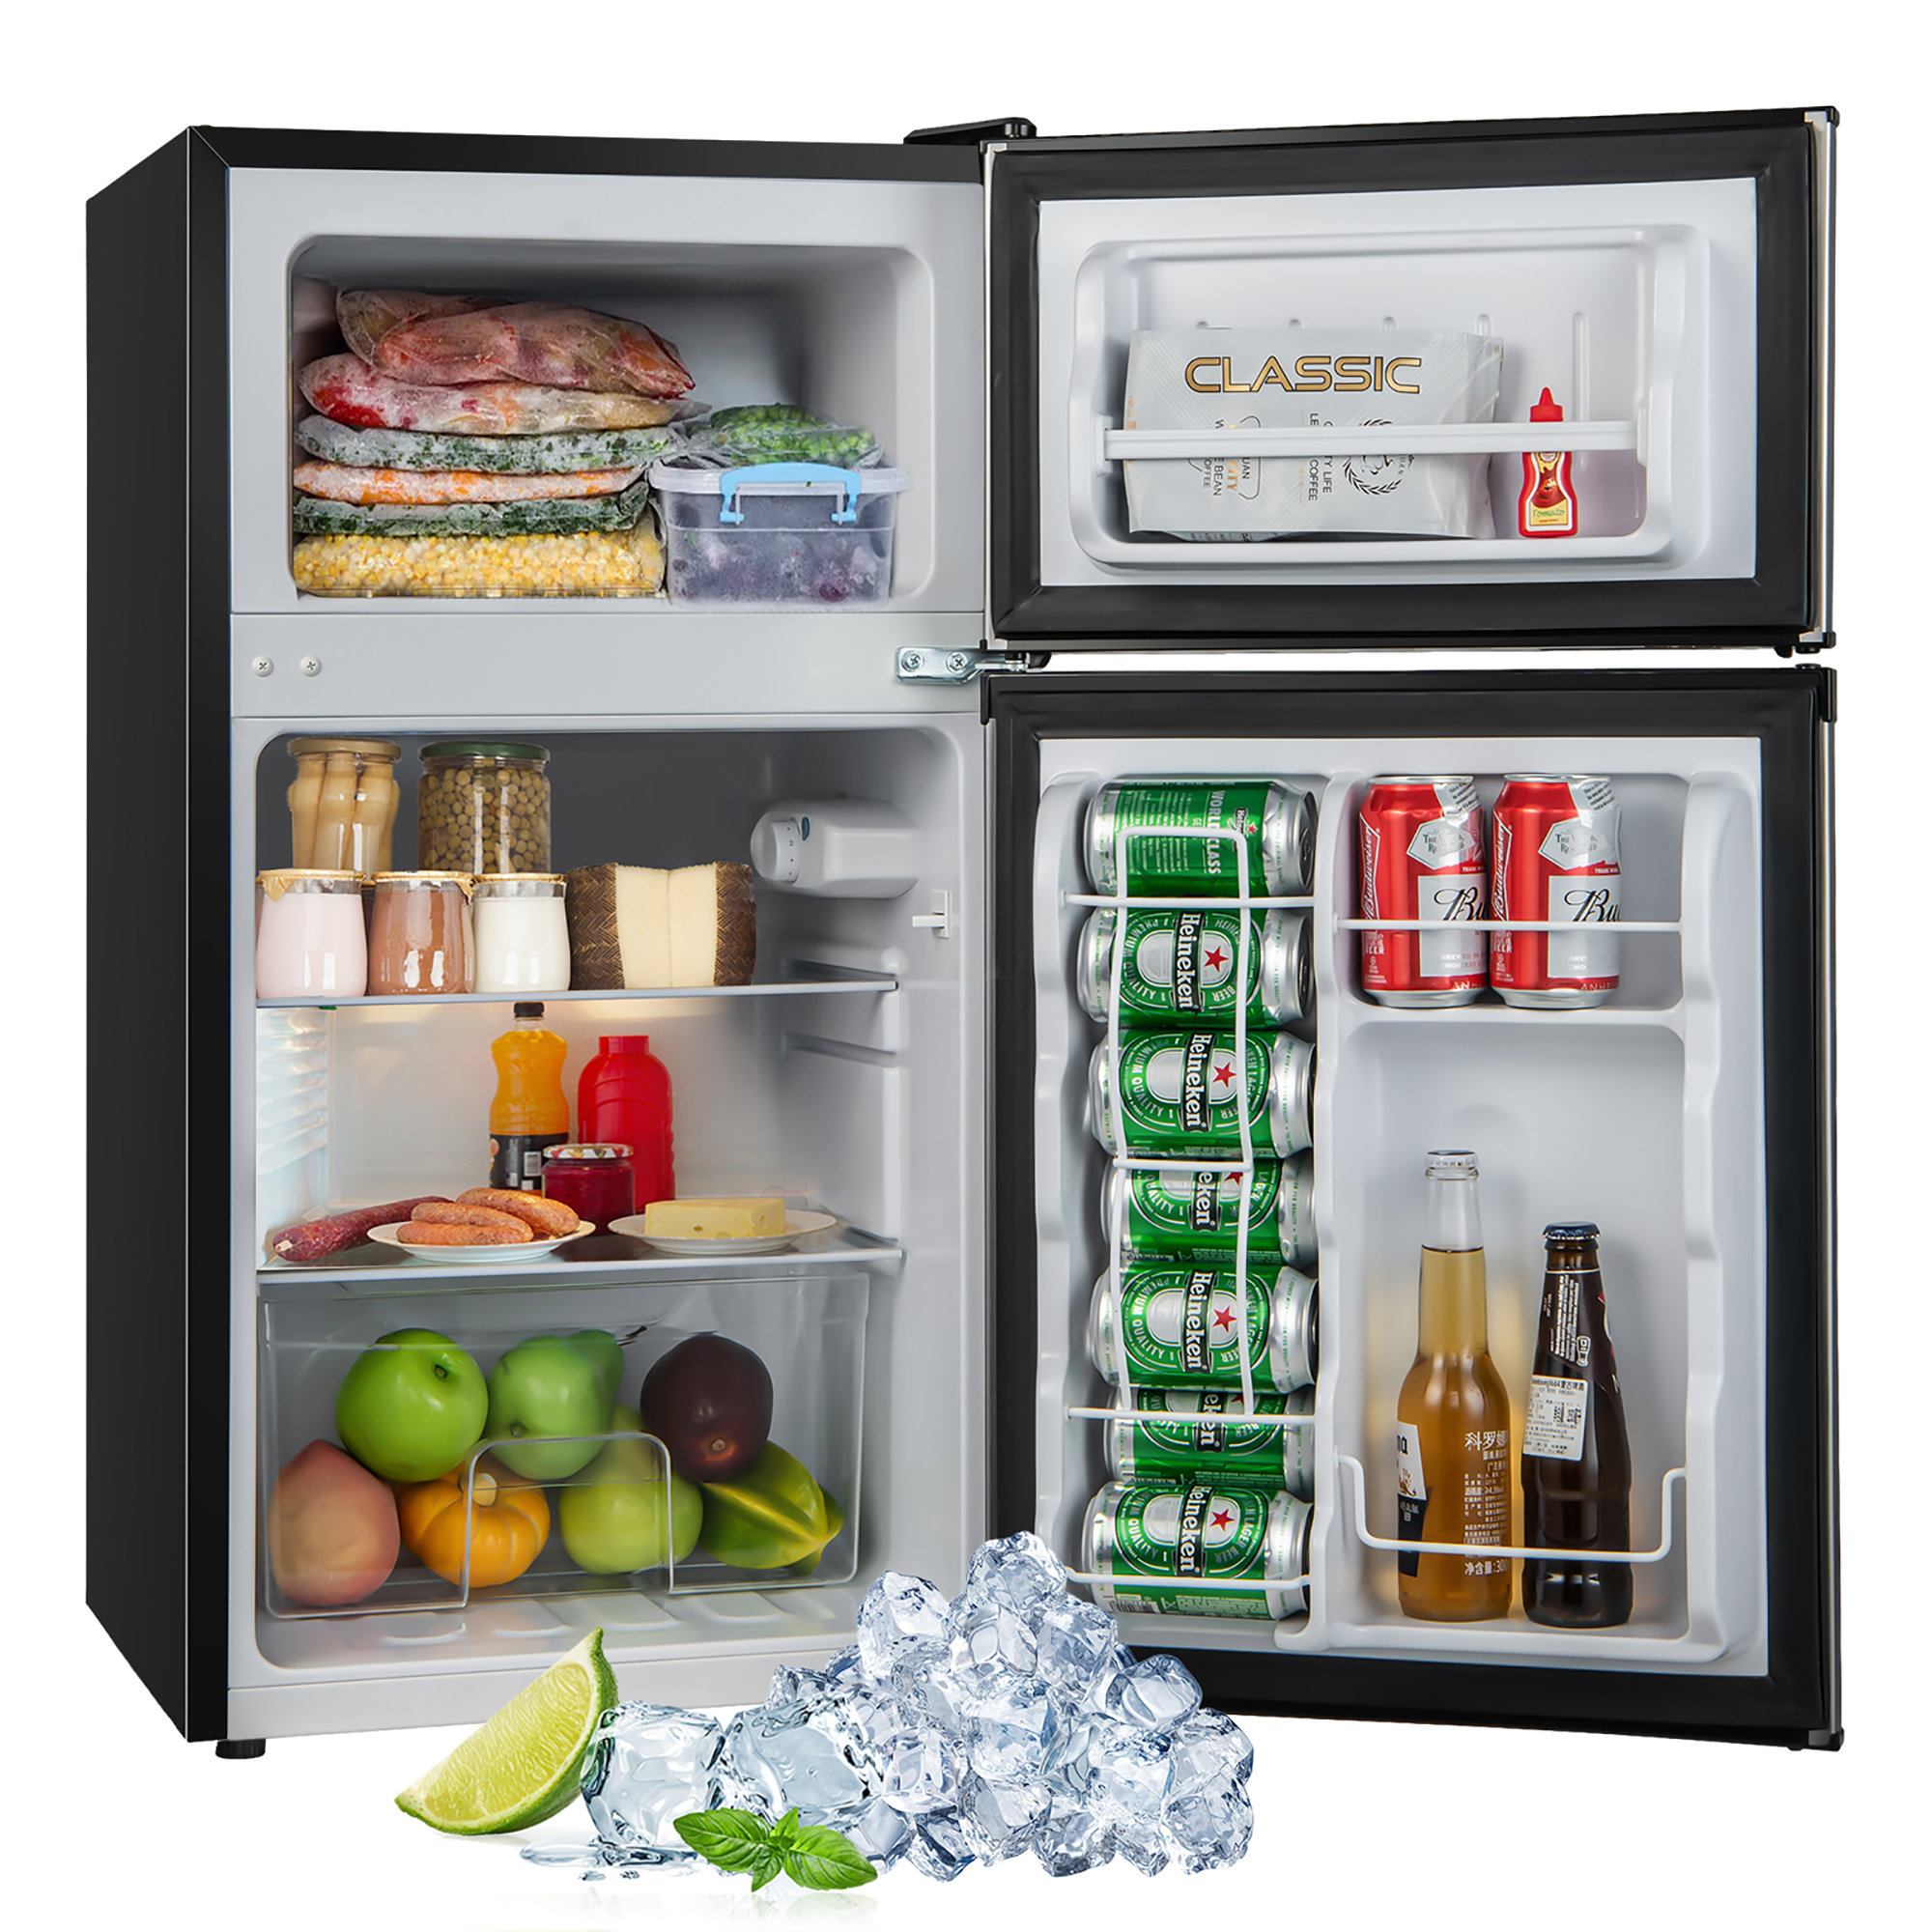 Jeremy Cass 19 in. 3.2 Cu.Ft. Mini Refrigerator in Silver with Freezer, Reversible Single Door, Energy Saving, Low Noise